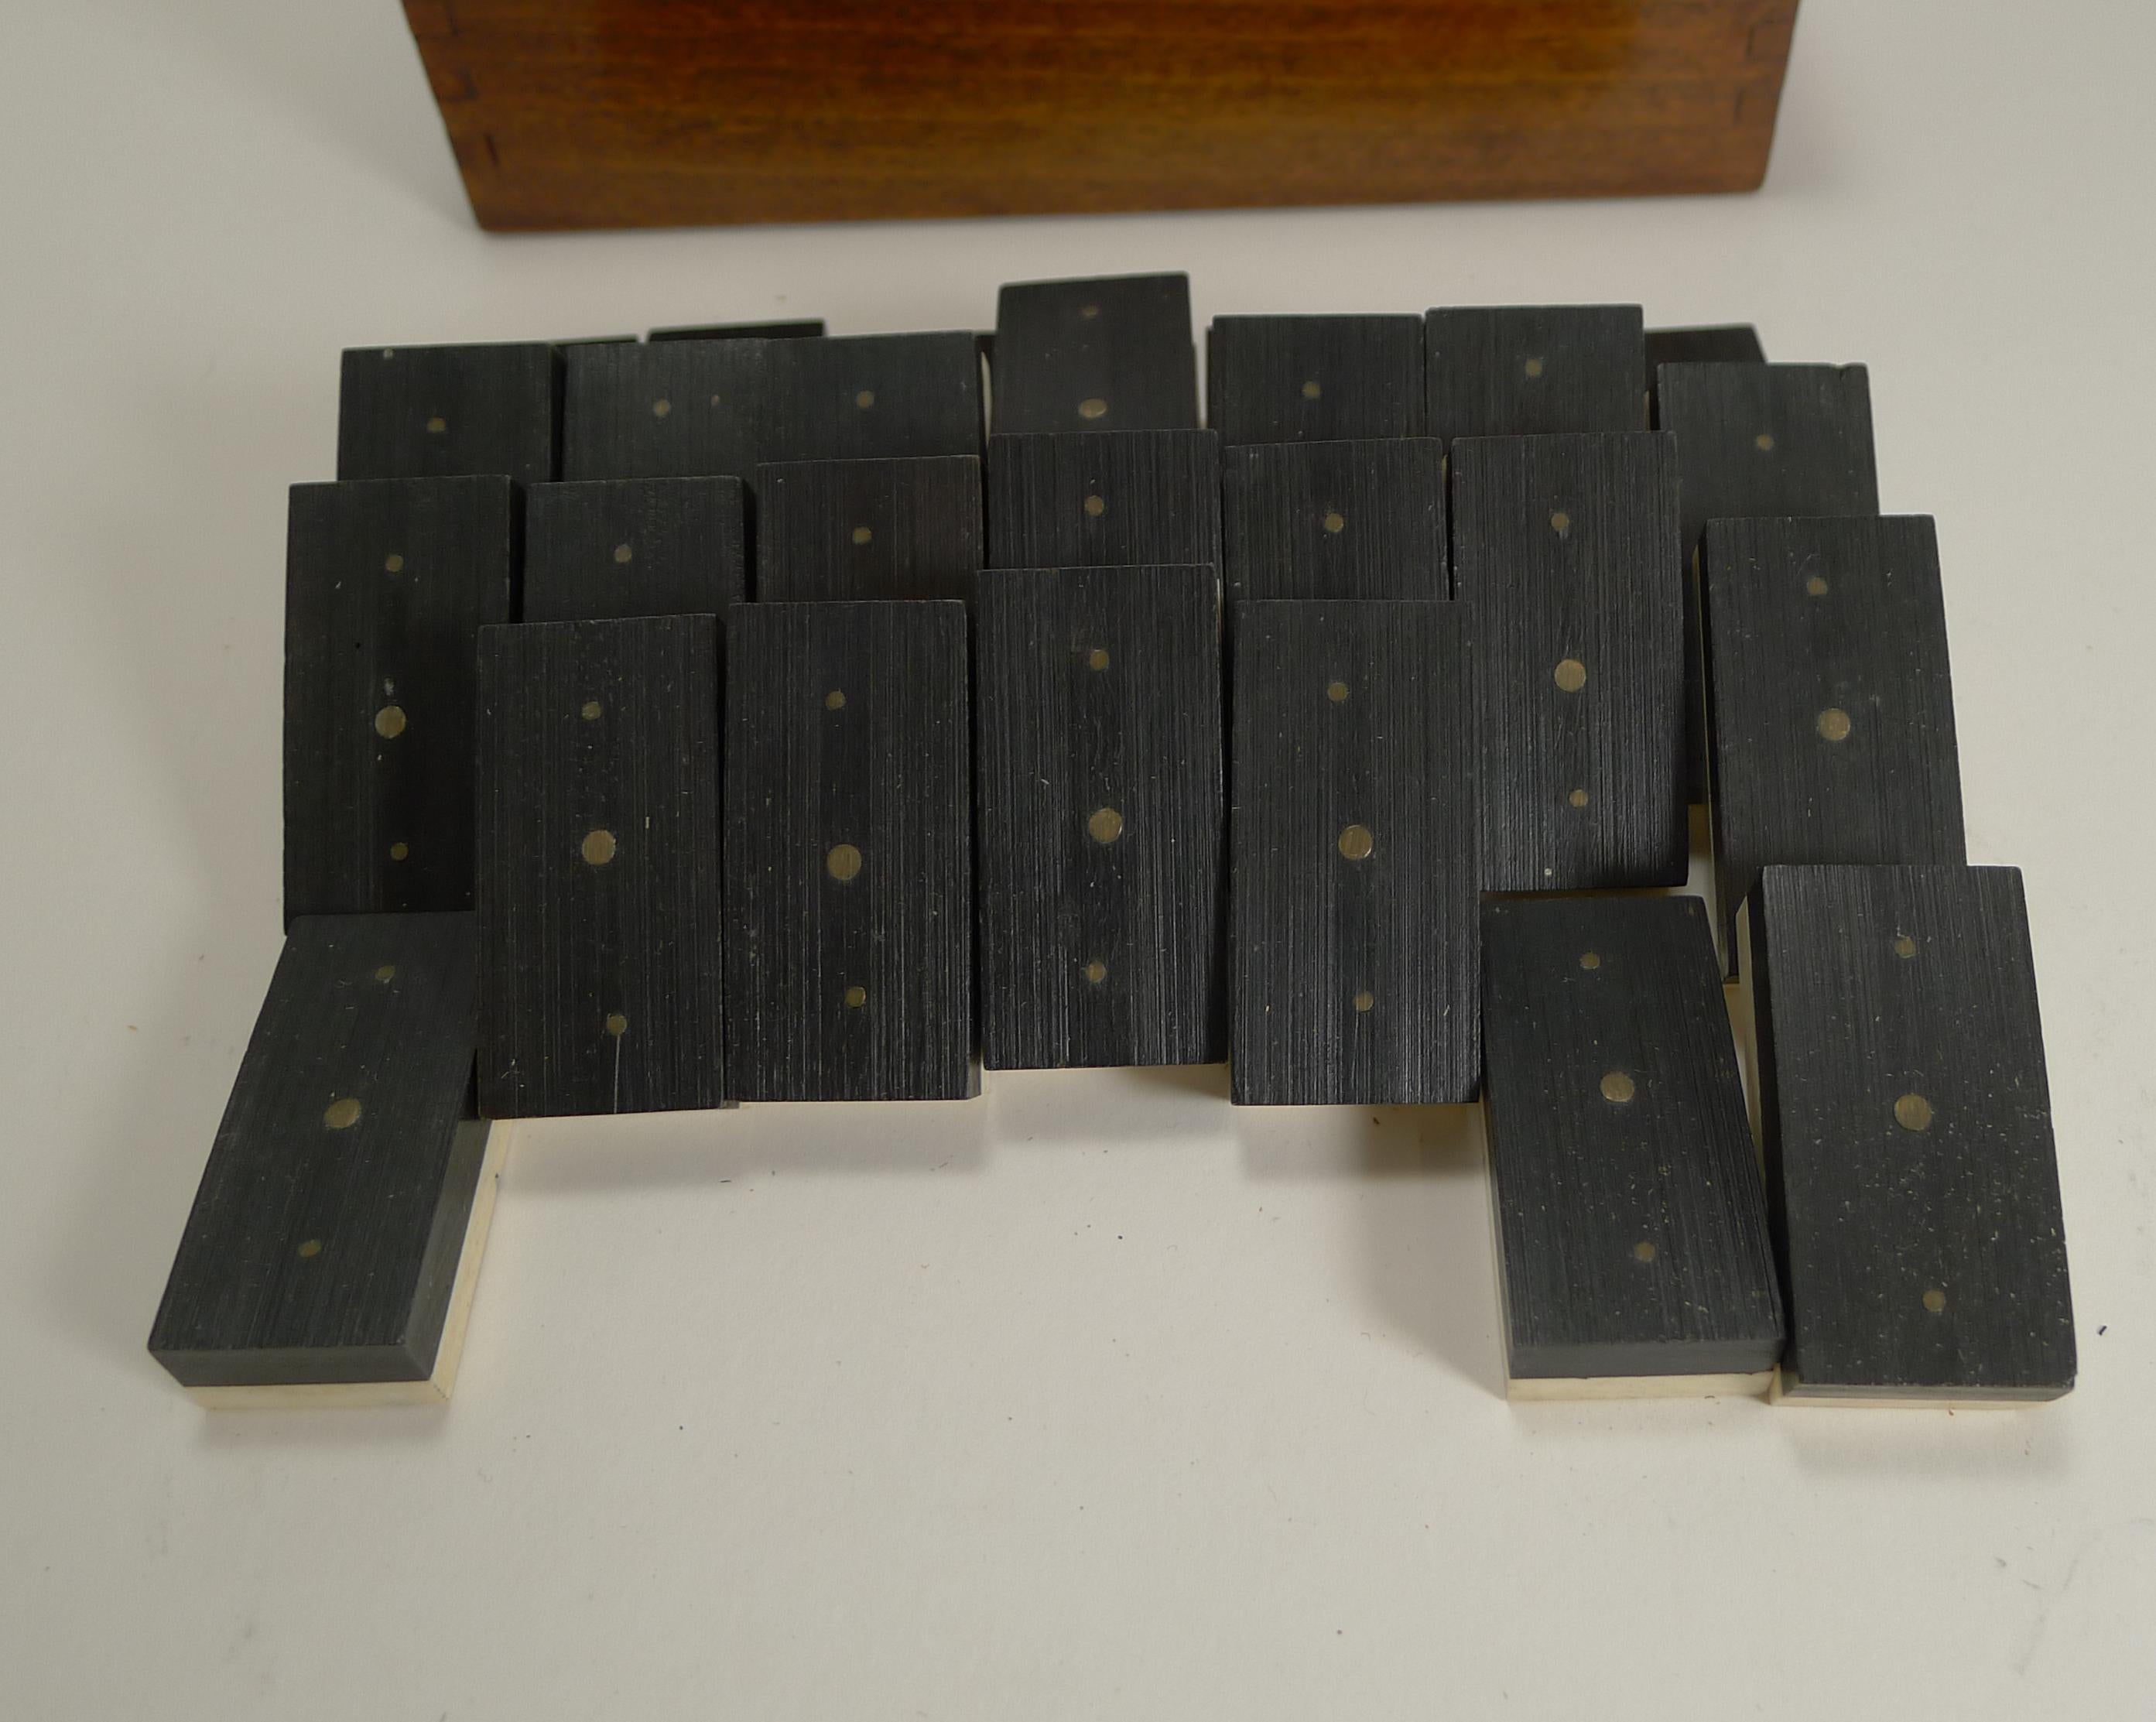 A charming set of late Edwardian dominoes or dominos, all in good condition with a handsome polished wooden storage box with a sliding lid.

The bone and Ebony pinned together with small brass pins. The inside is stamped with the makers